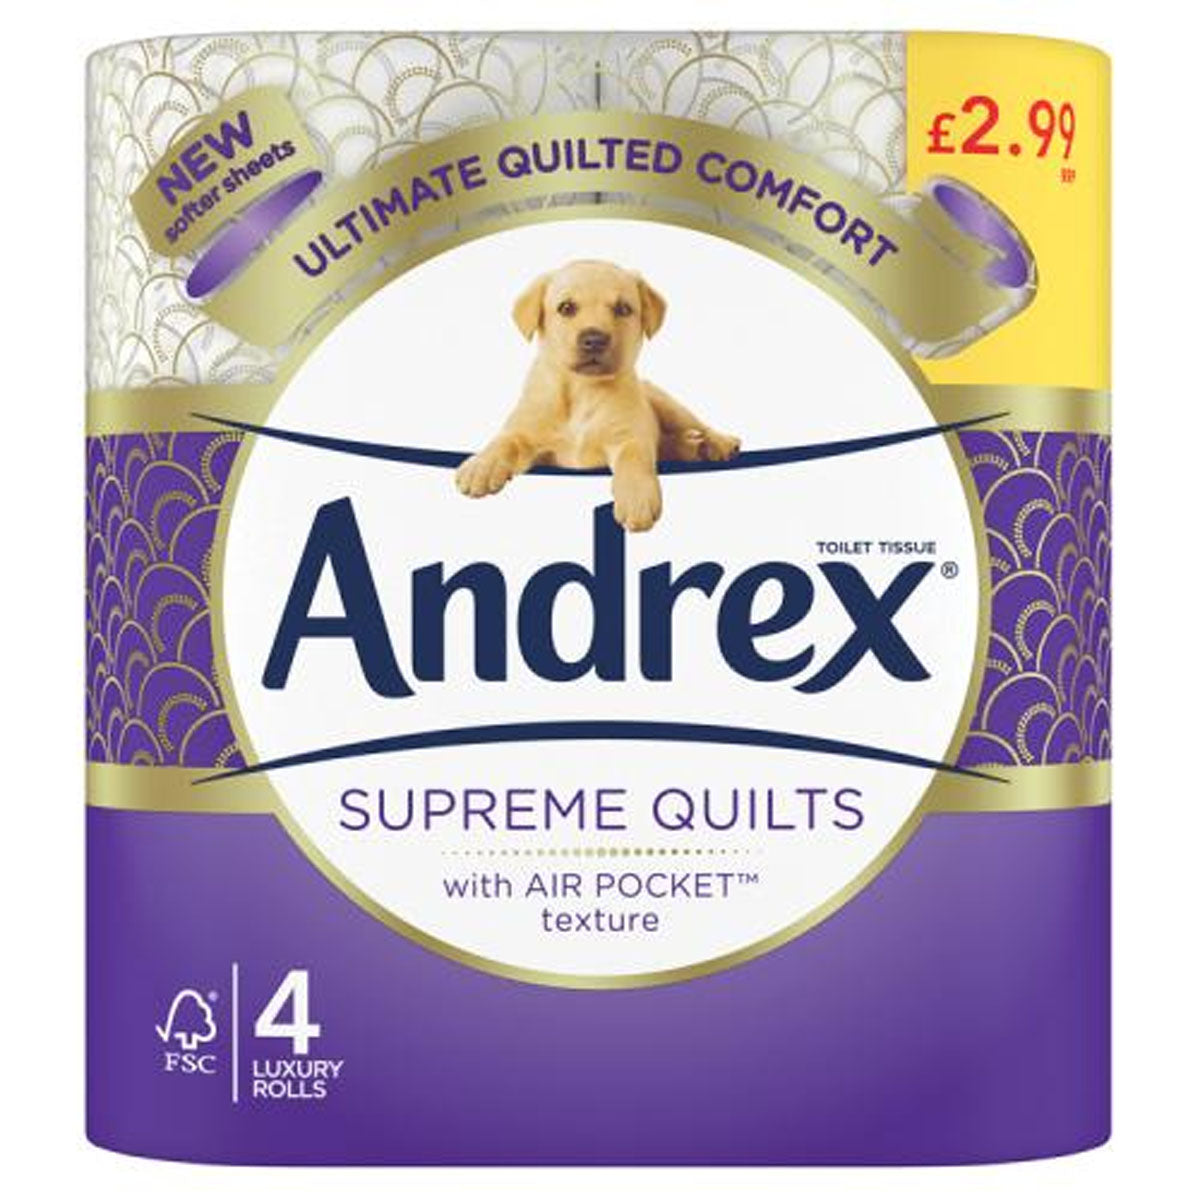 Andrex - Supreme Quilts Toilet Tissues - 4 Rolls - Continental Food Store